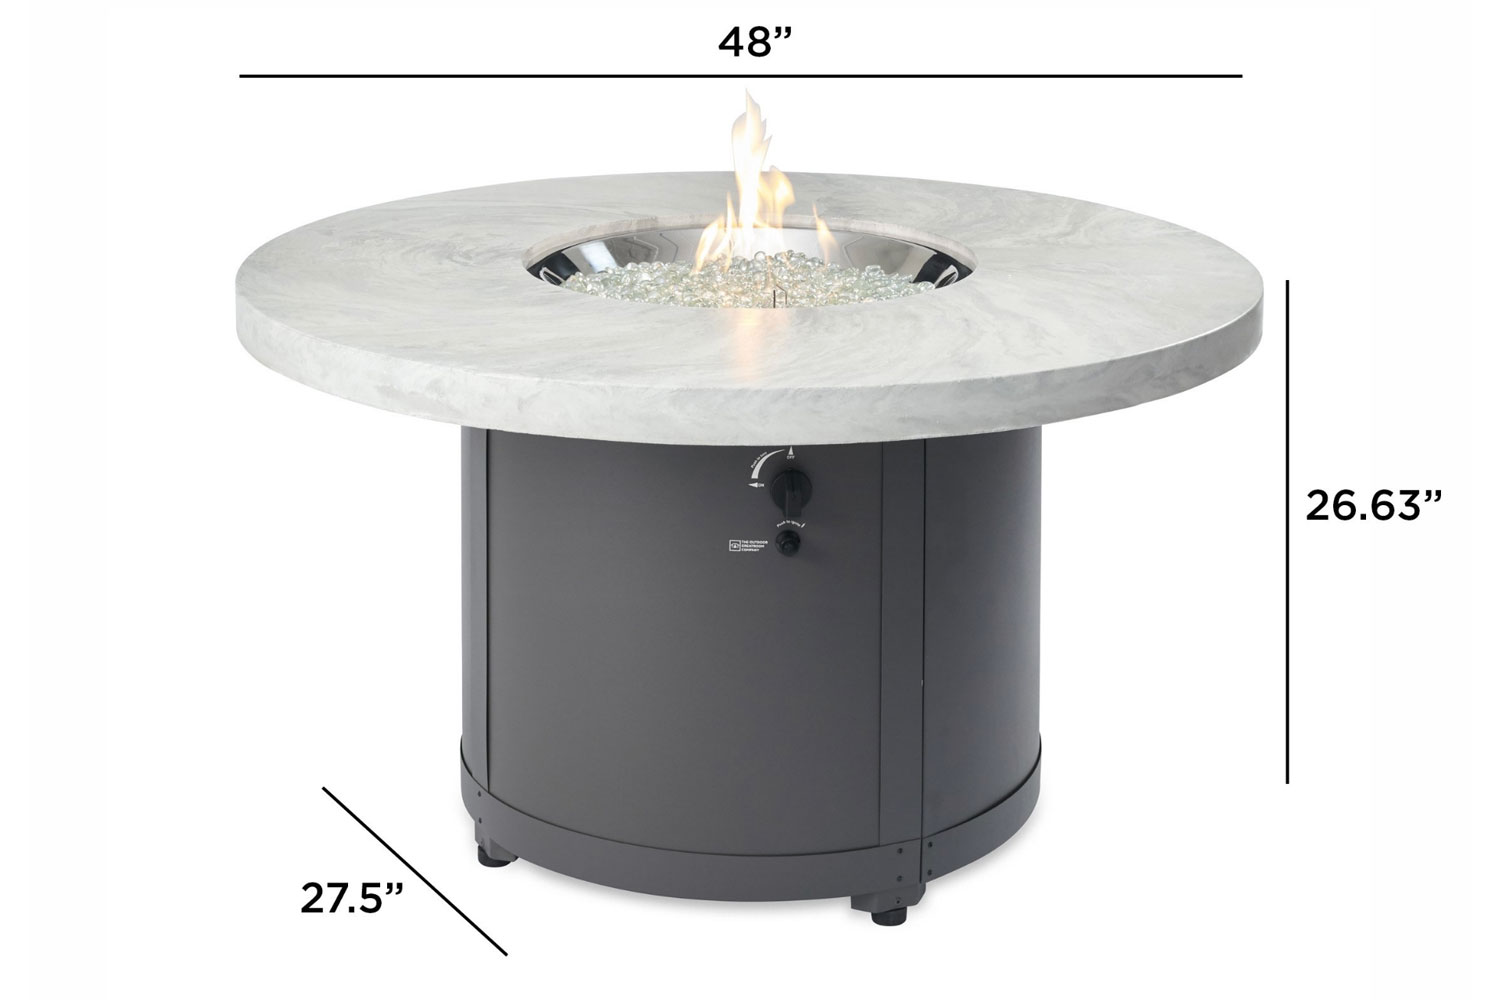 Beacons Chat Height White Onyx Fire Pit Table Specifications